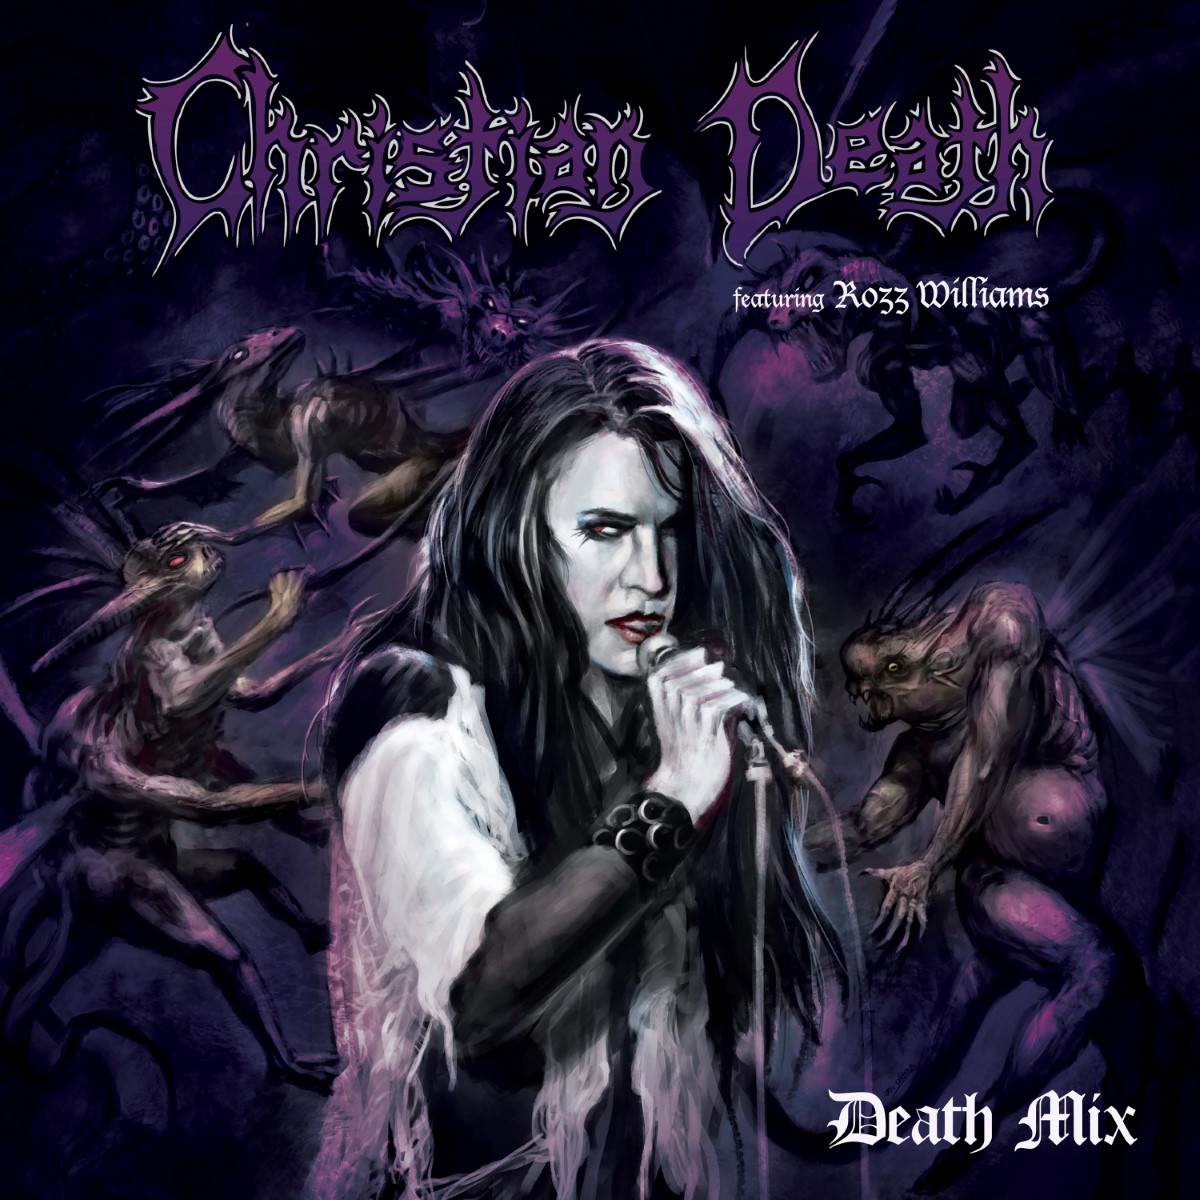 Goth Rock Masters CHRISTIAN DEATH Goes Beyond The Veil With DEATH MIX!